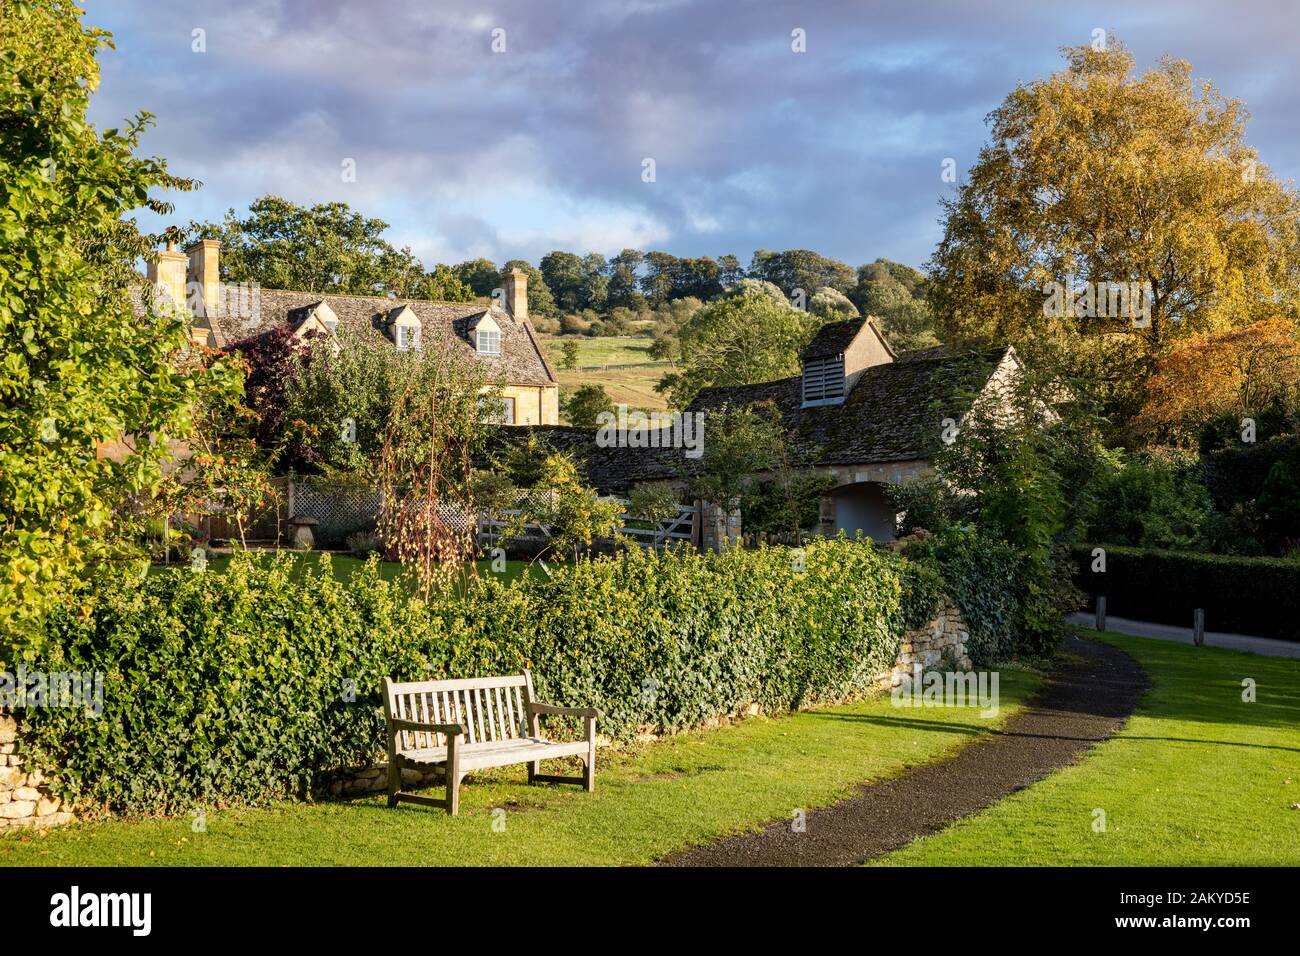 Evening sunlight over country home in Stanton, Gloucestershire, England, UK Stock Photo